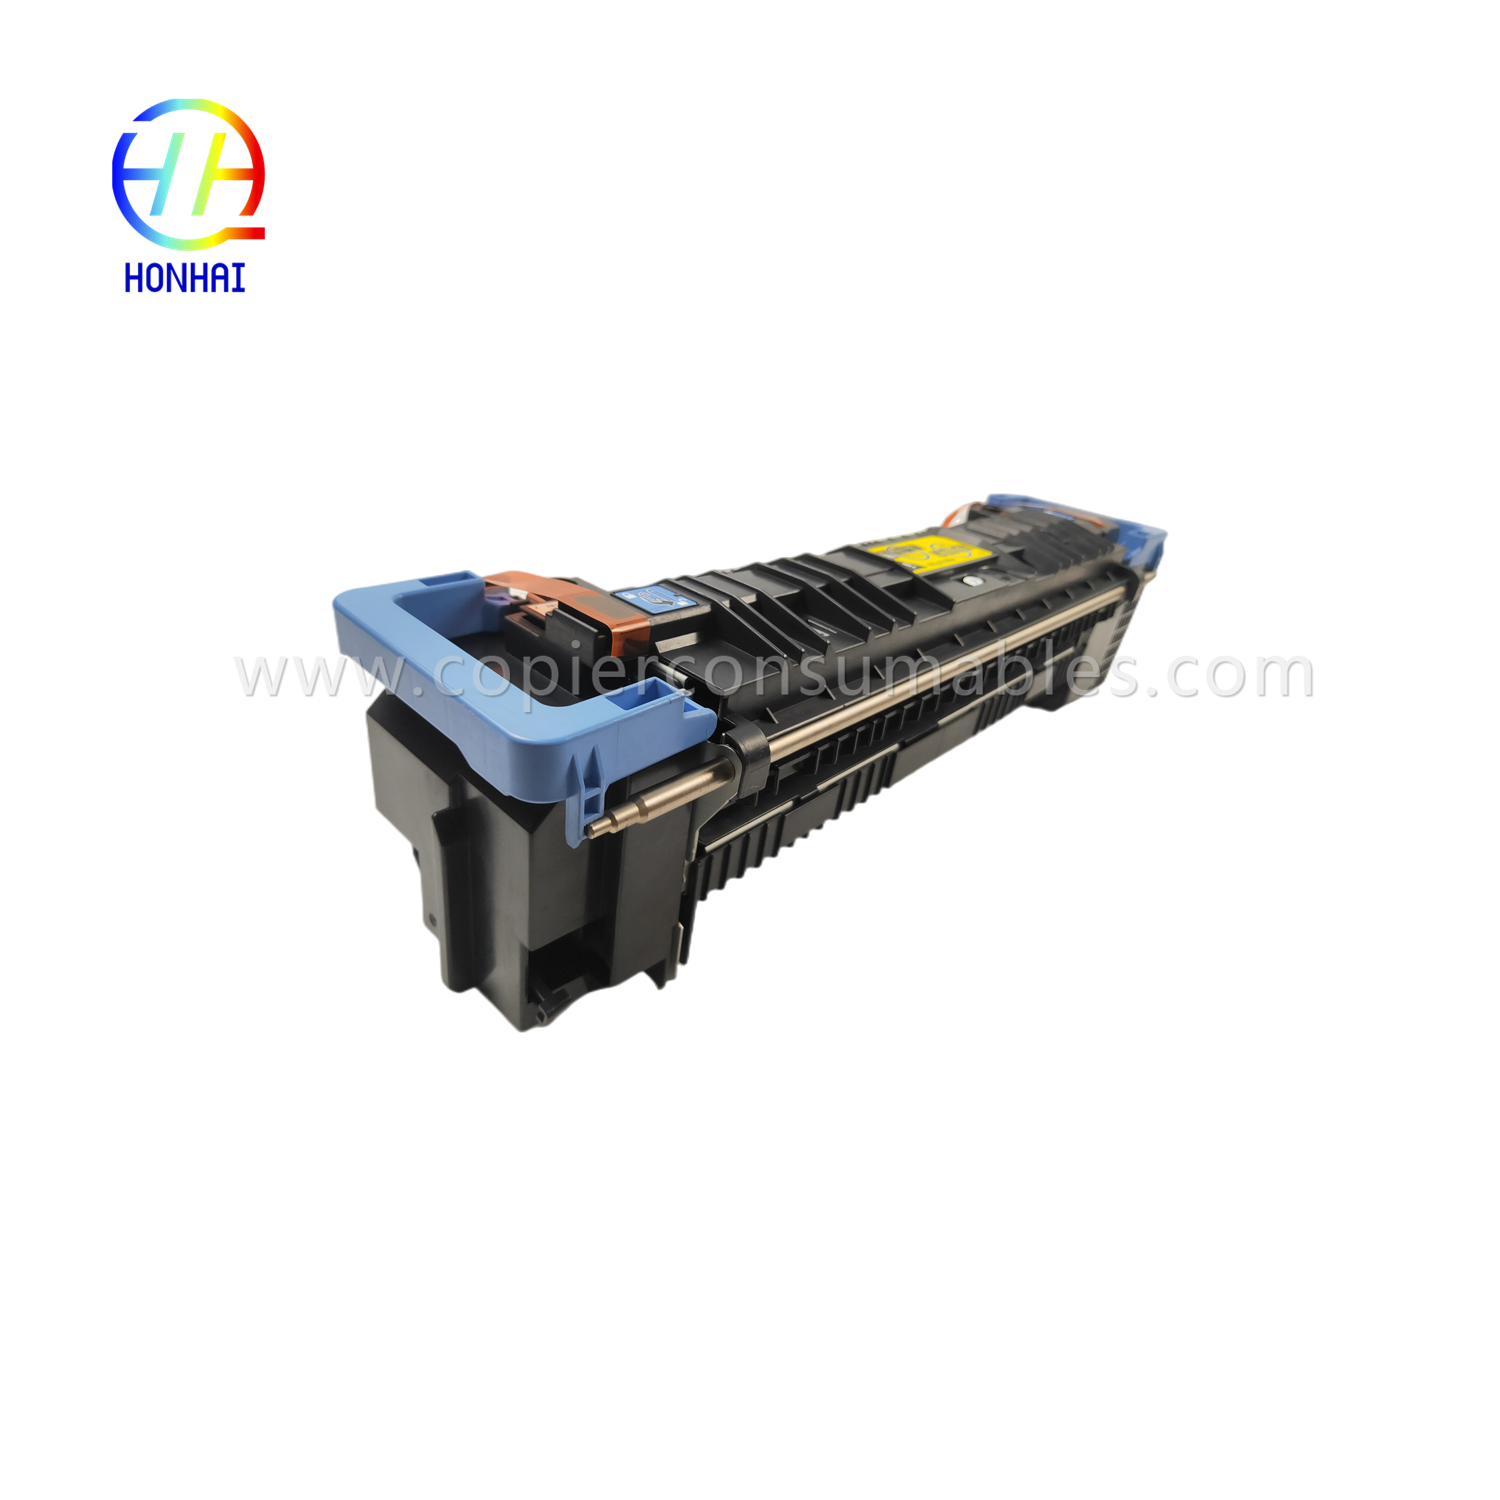 https://www.copierconsumables.com/fuser-assembly-unit-for-hp-m855-m880-m855dn-m855xh-m880z-m880z-c1n54-67901-c1n58-67901-fusing-heating-proxing